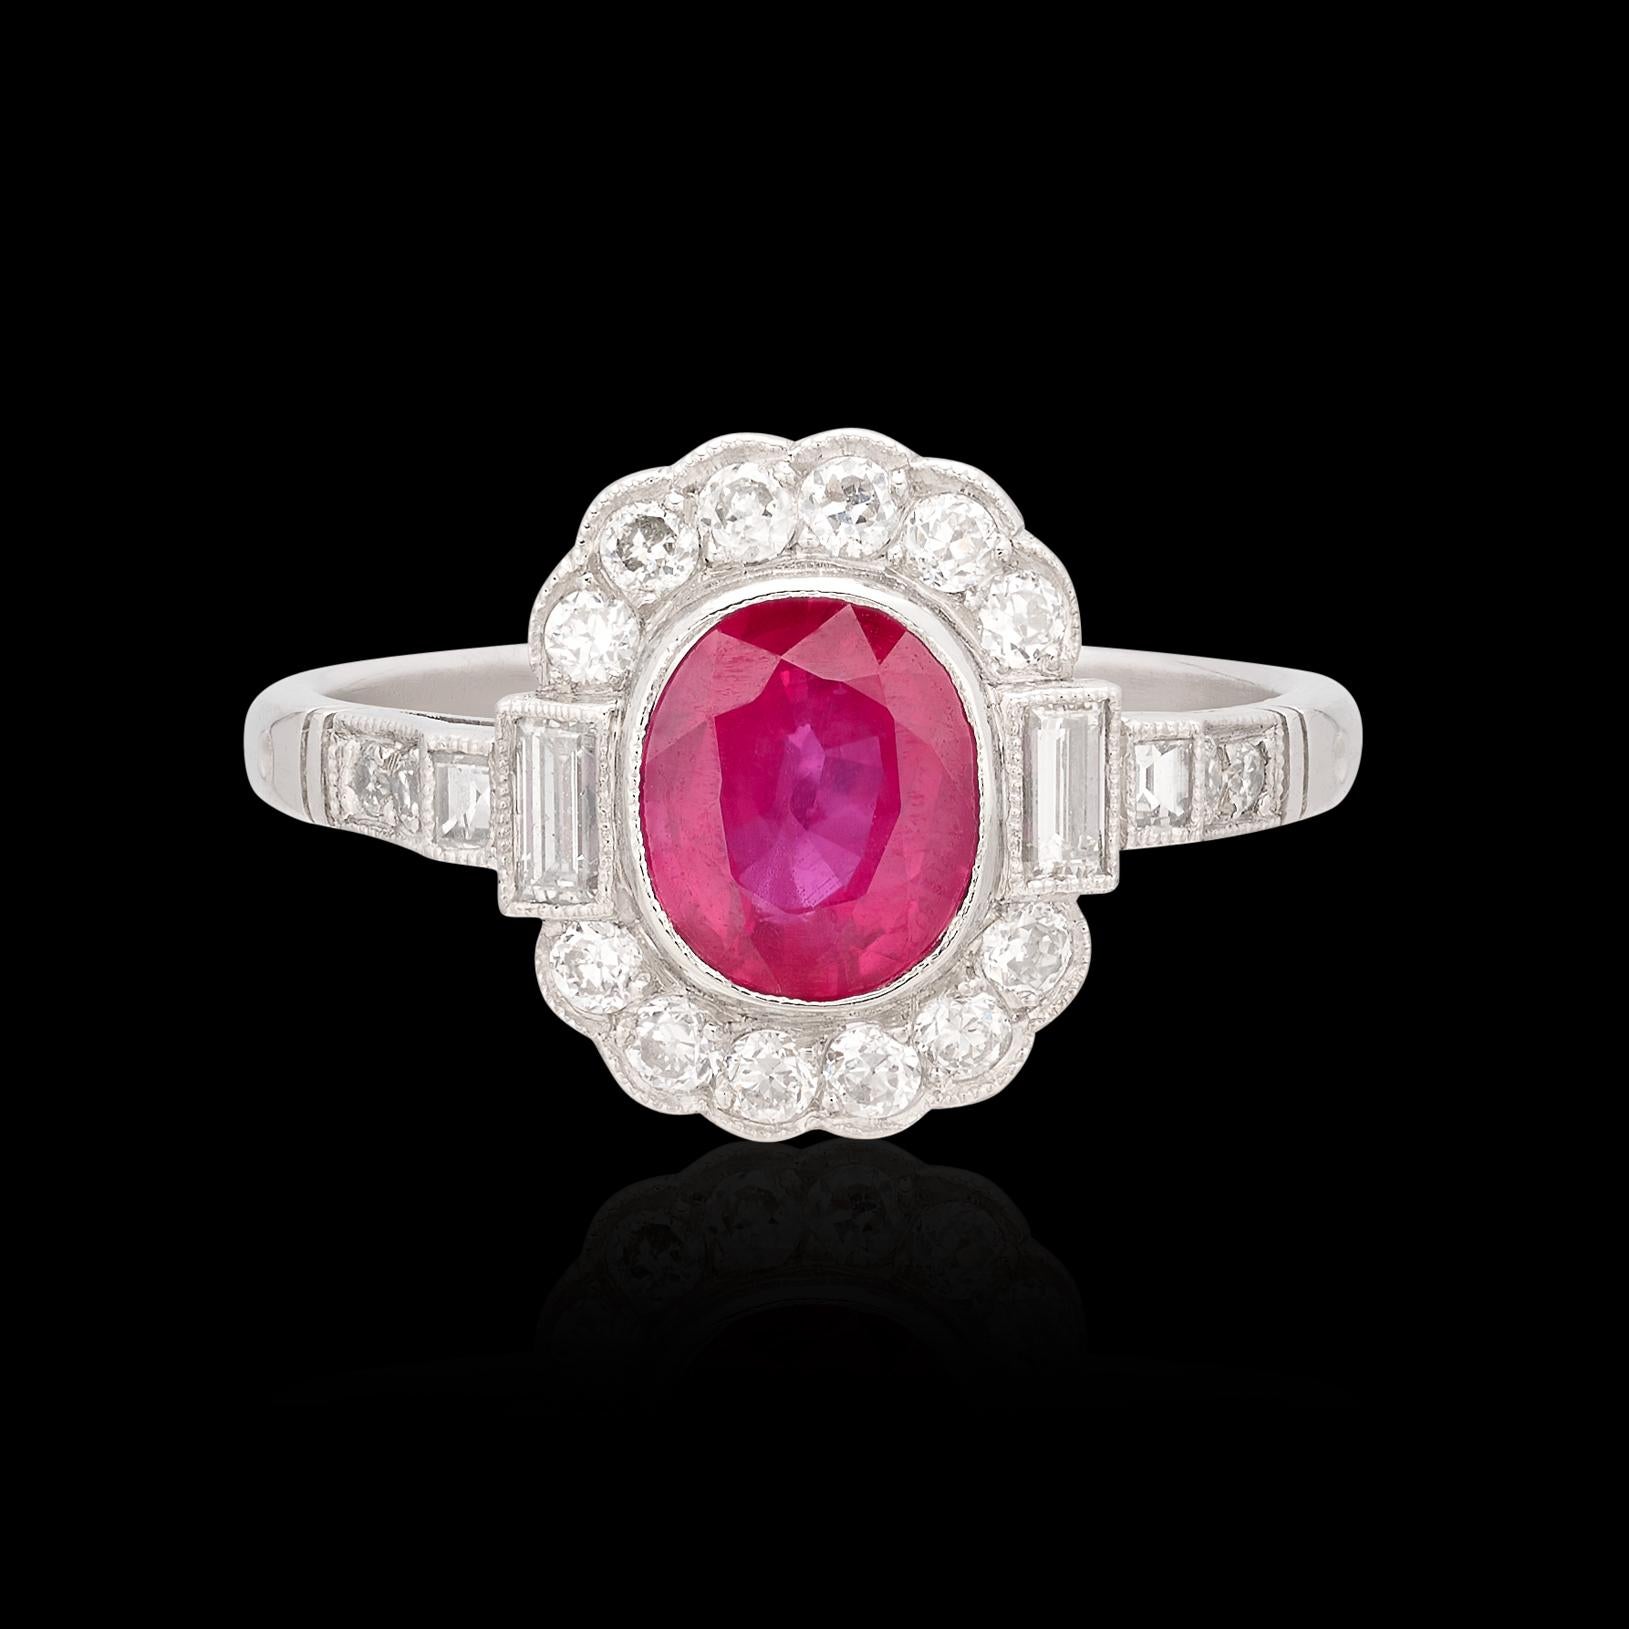 For those who appreciate the finer things! This platinum beauty features a Oval Cut Natural Ruby expertly bezel set amidst .80 carats of fine antique Old European and Baguette Cut diamonds (averaging H/VS-SI). The vibrant center ruby weighs 1.19